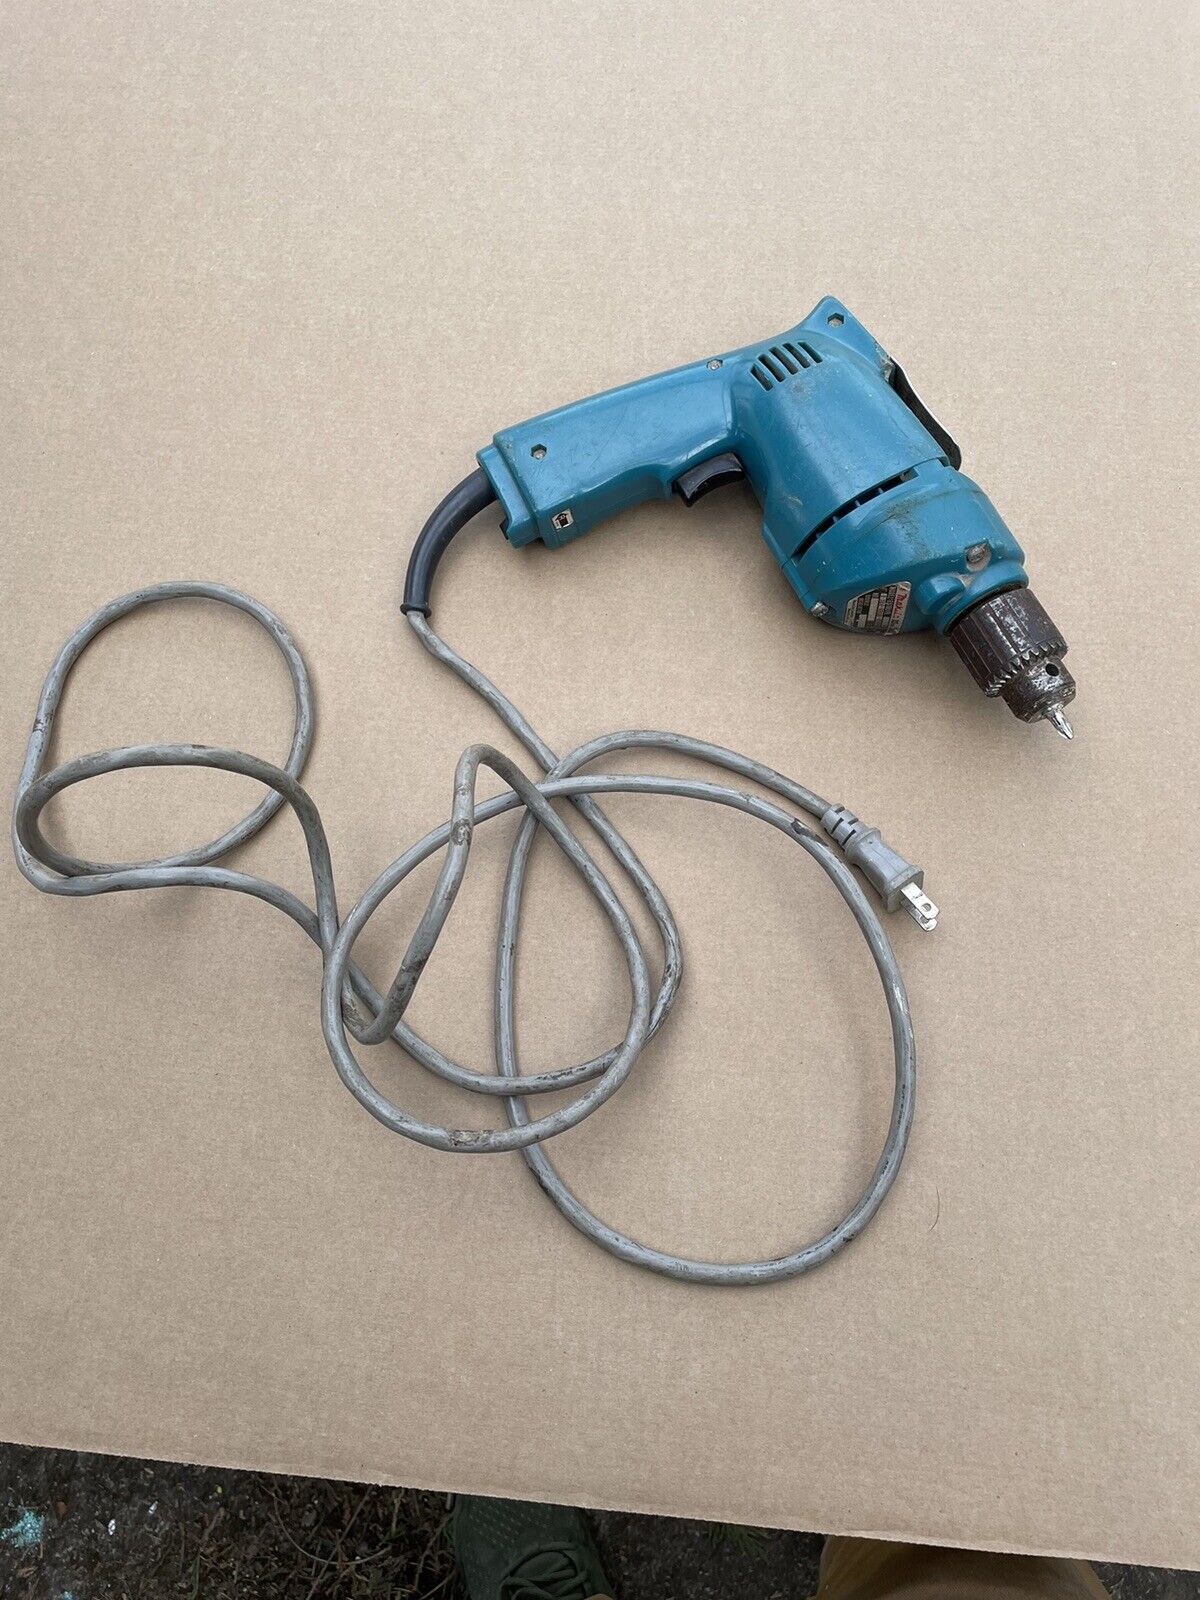 Vintage Makita Corded Drill Made In Japan Tested Works See Video 6510lvr